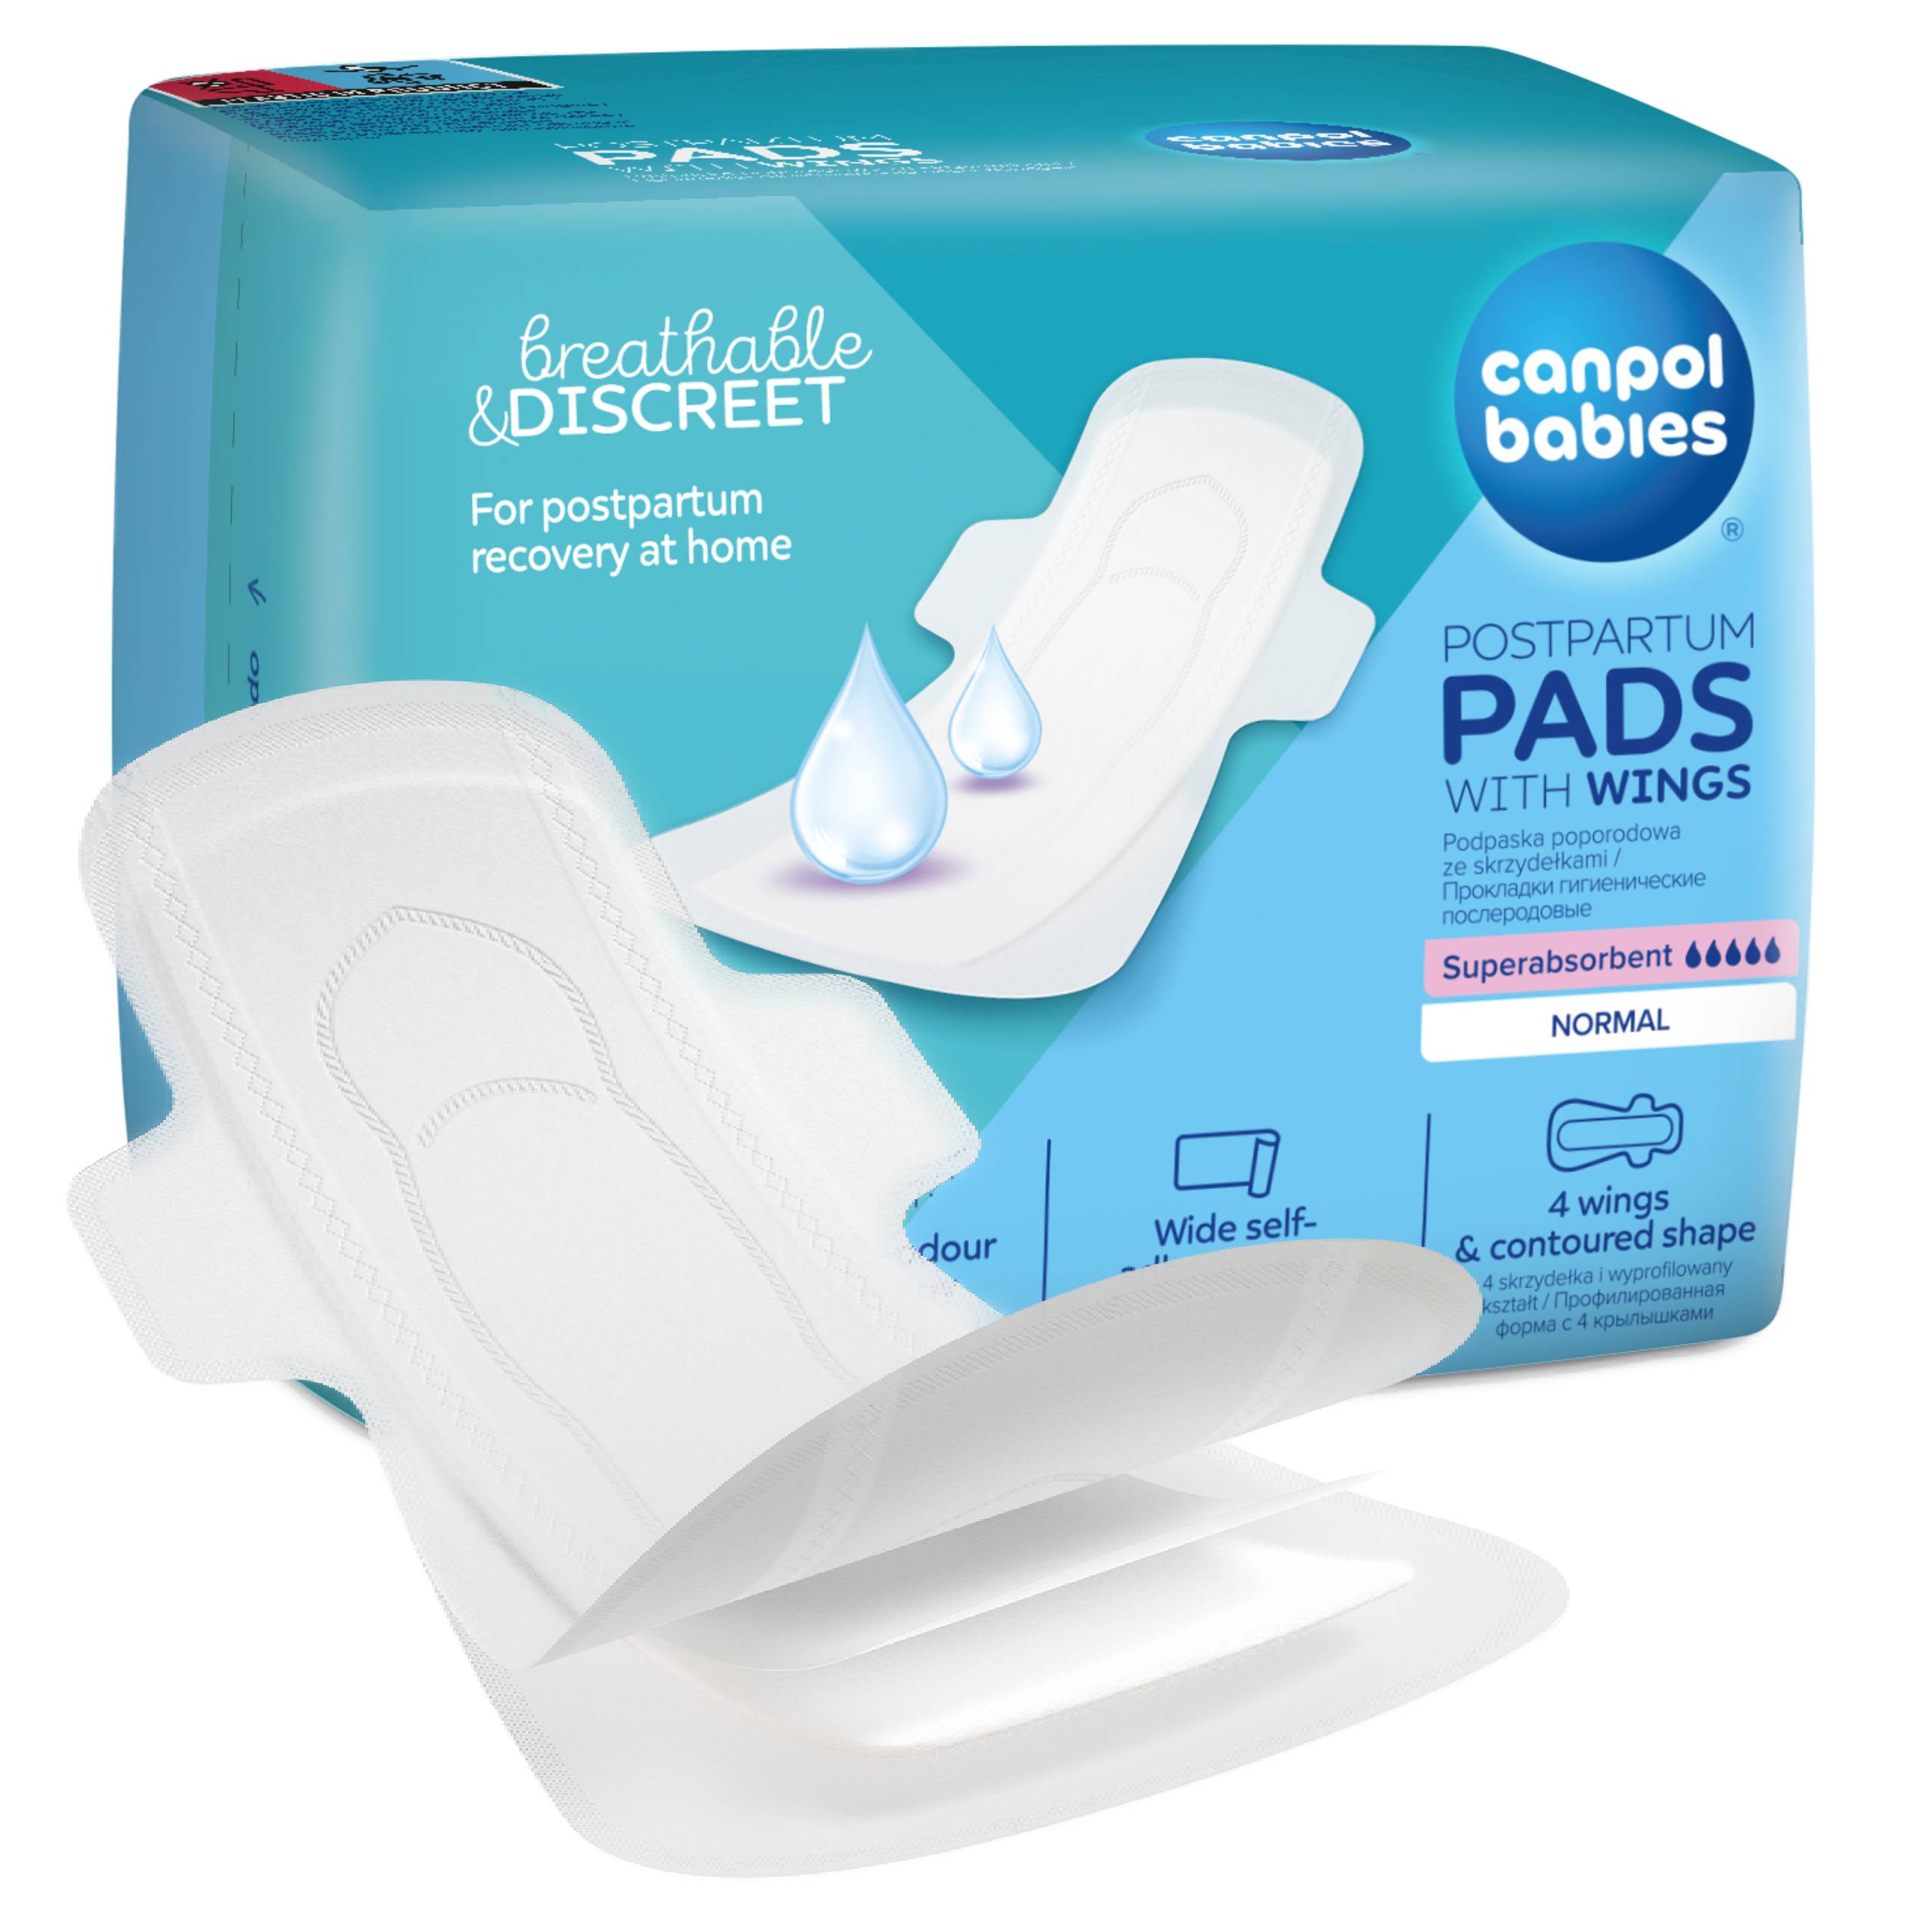 Canpol Babies: discreet postpartum pads with wings for the day 10 pcs.